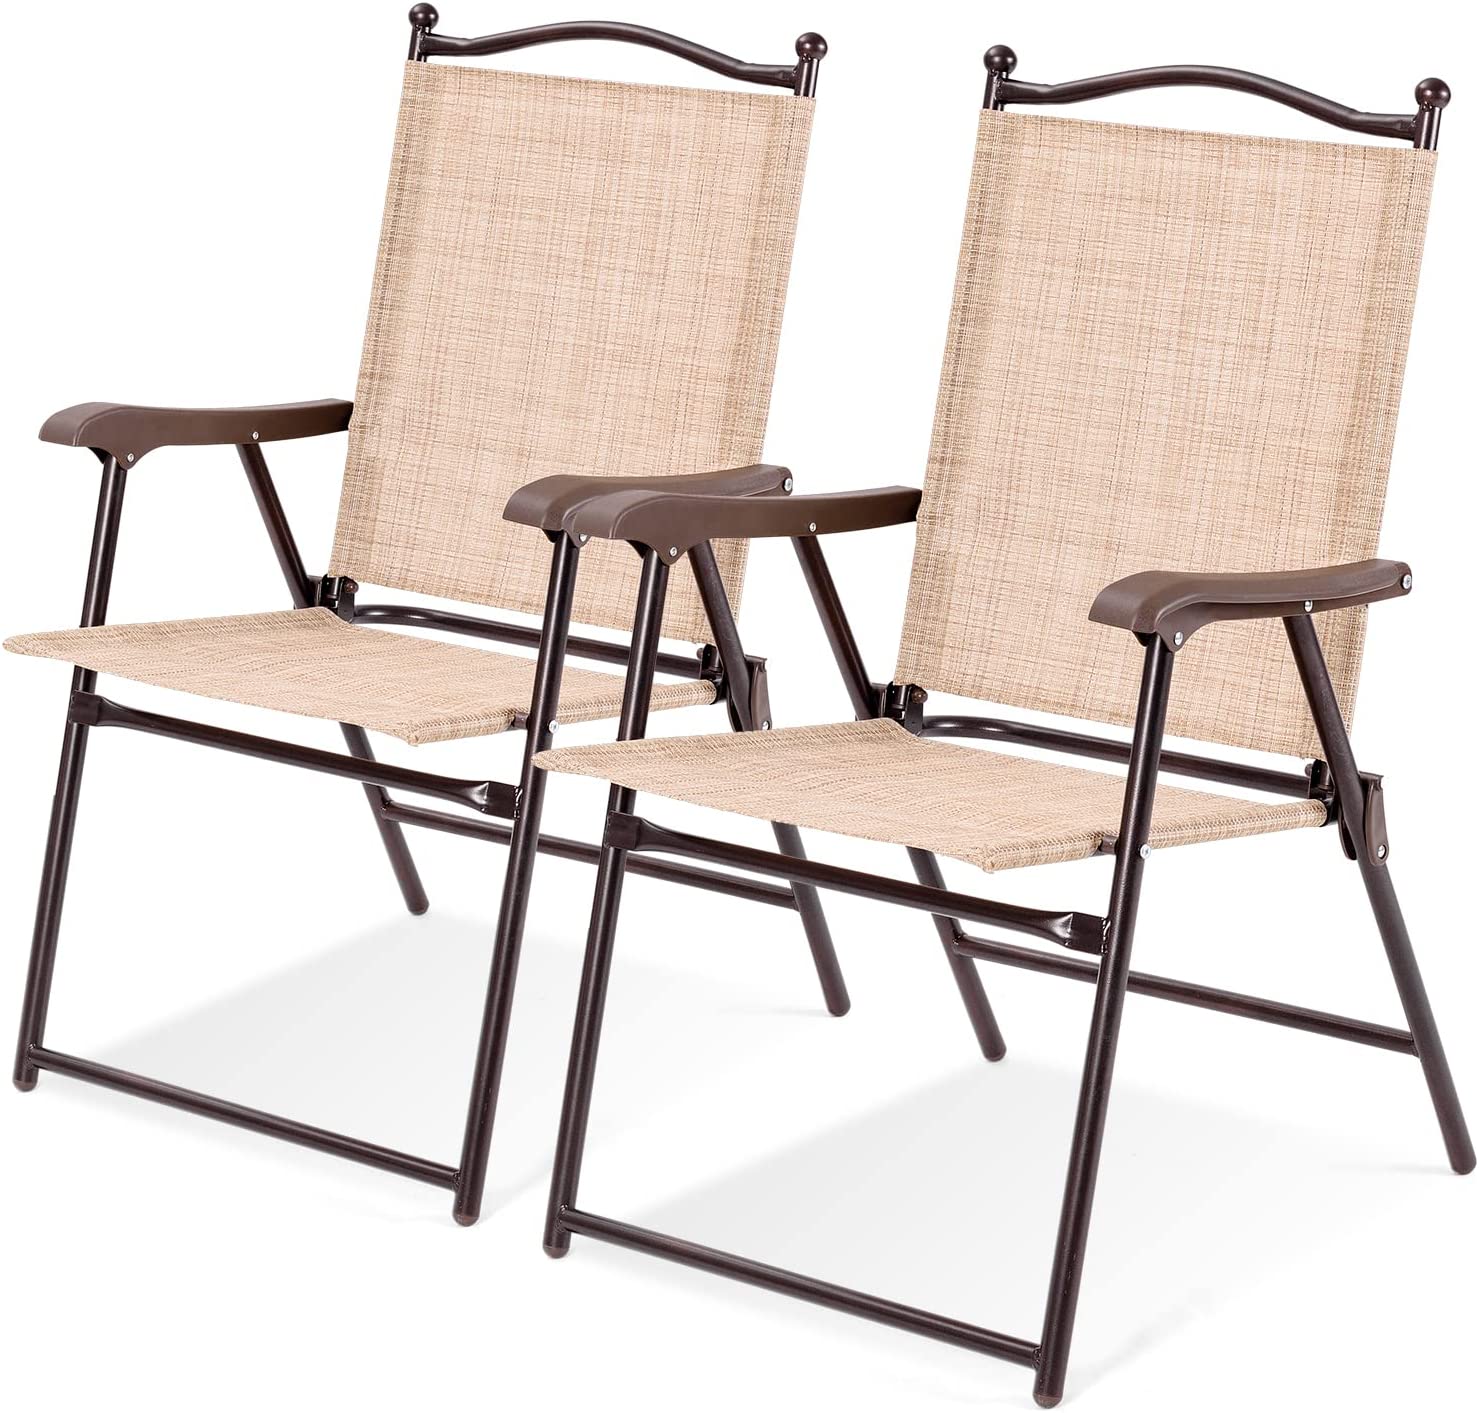 Set of 2 Patio Folding Dining Chairs, Outdoor Sling Lawn Chairs with Armrests, Steel Frame, Portable Camping Lounge Chairs for Backyard, Deck, Poolside and Garden, No Assembly (Beige)